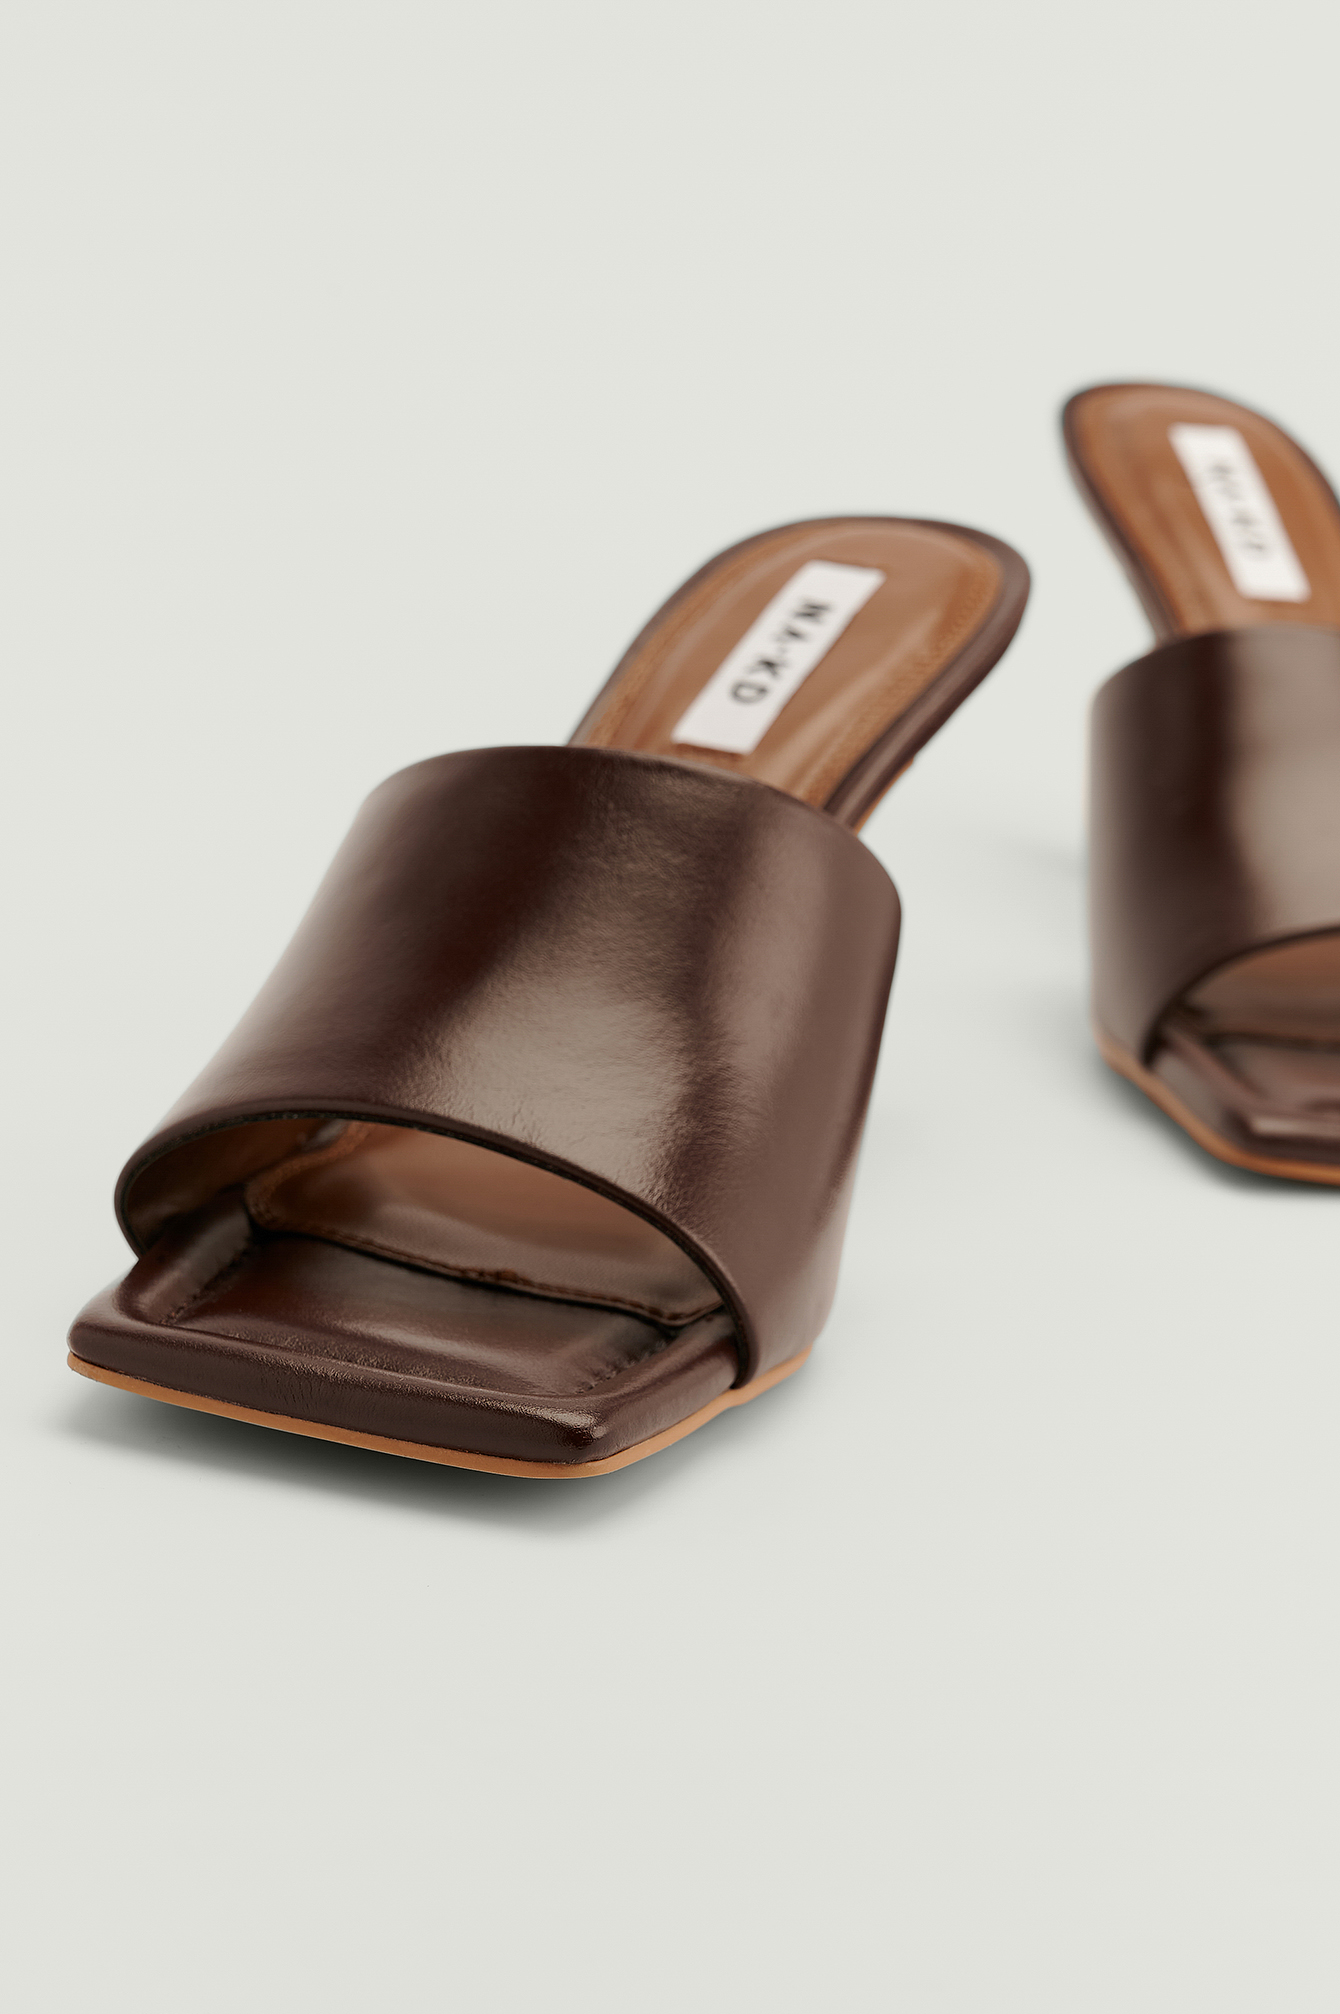 Chocolate Padded Sole Stiletto Mules